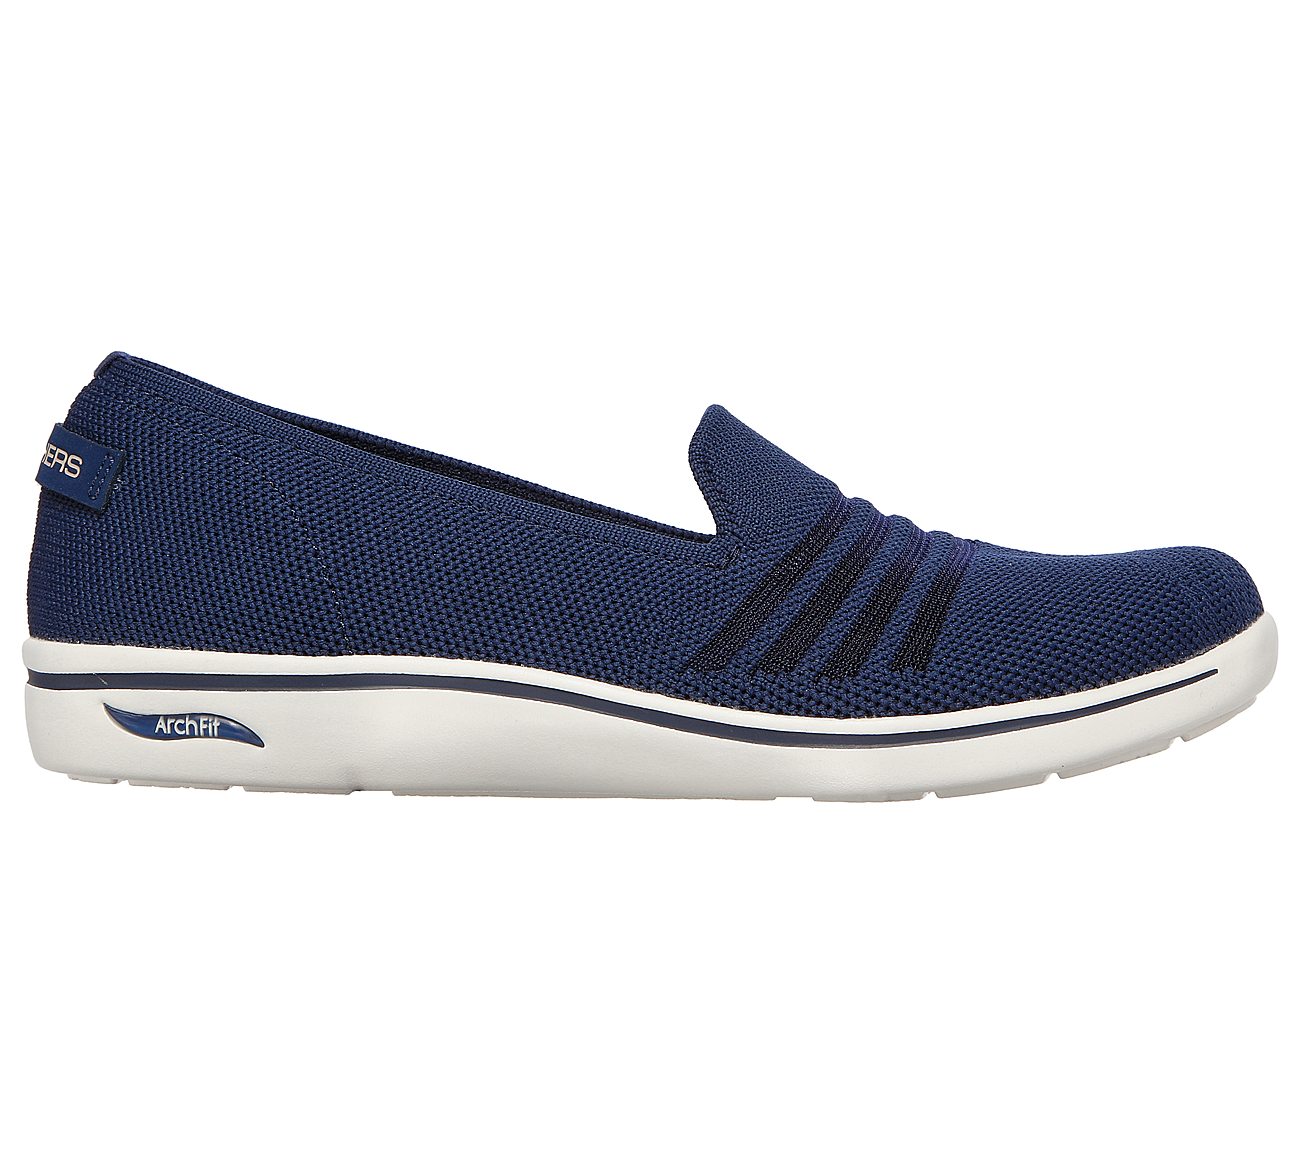 ARCH FIT UPLIFT-CUTTING EDGE, NNNAVY Footwear Lateral View